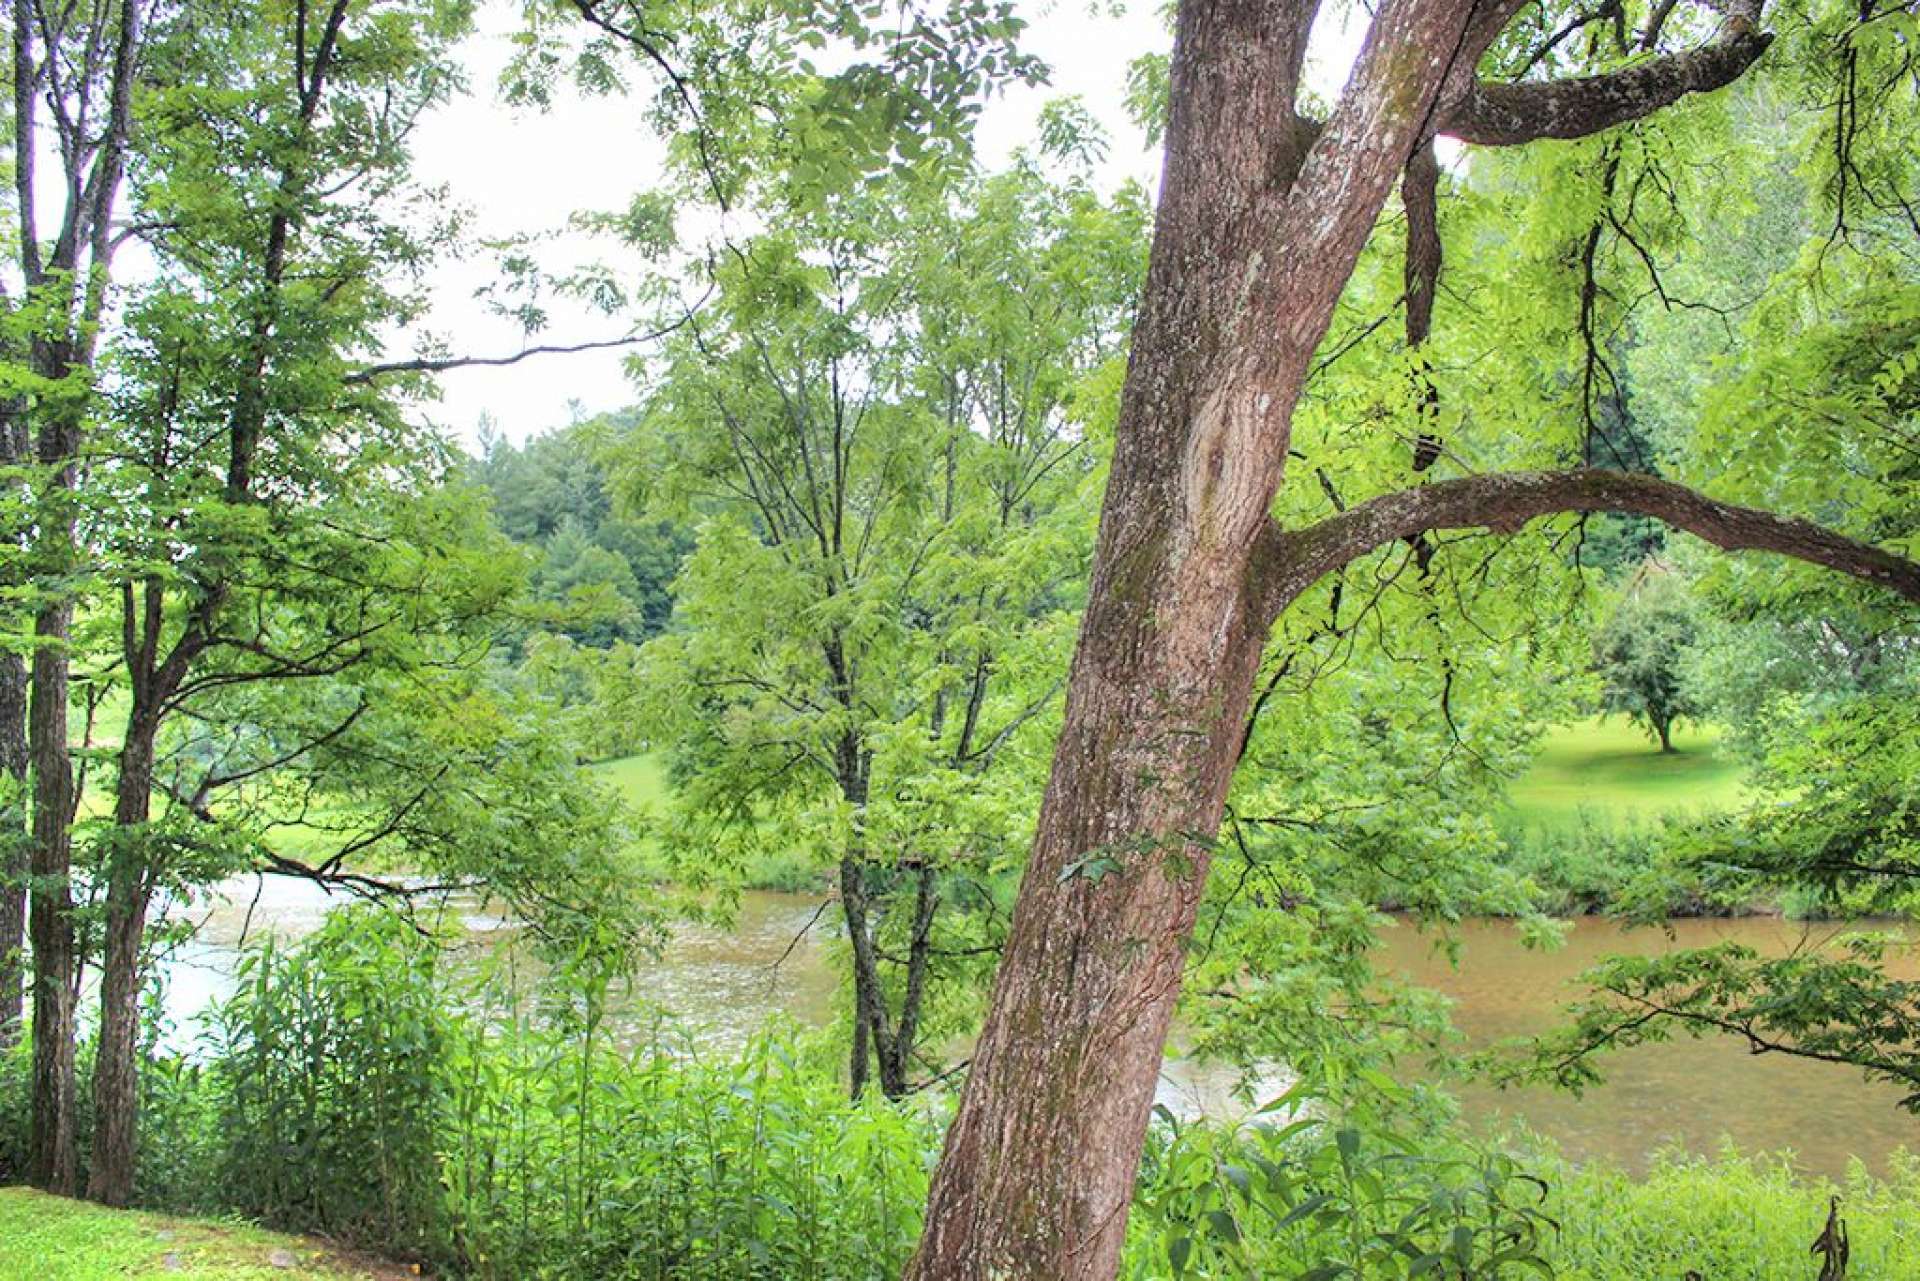 These home sites offer approximately 250+ft of frontage on the river offering exceptionally peaceful views.  Perfect for relaxation.